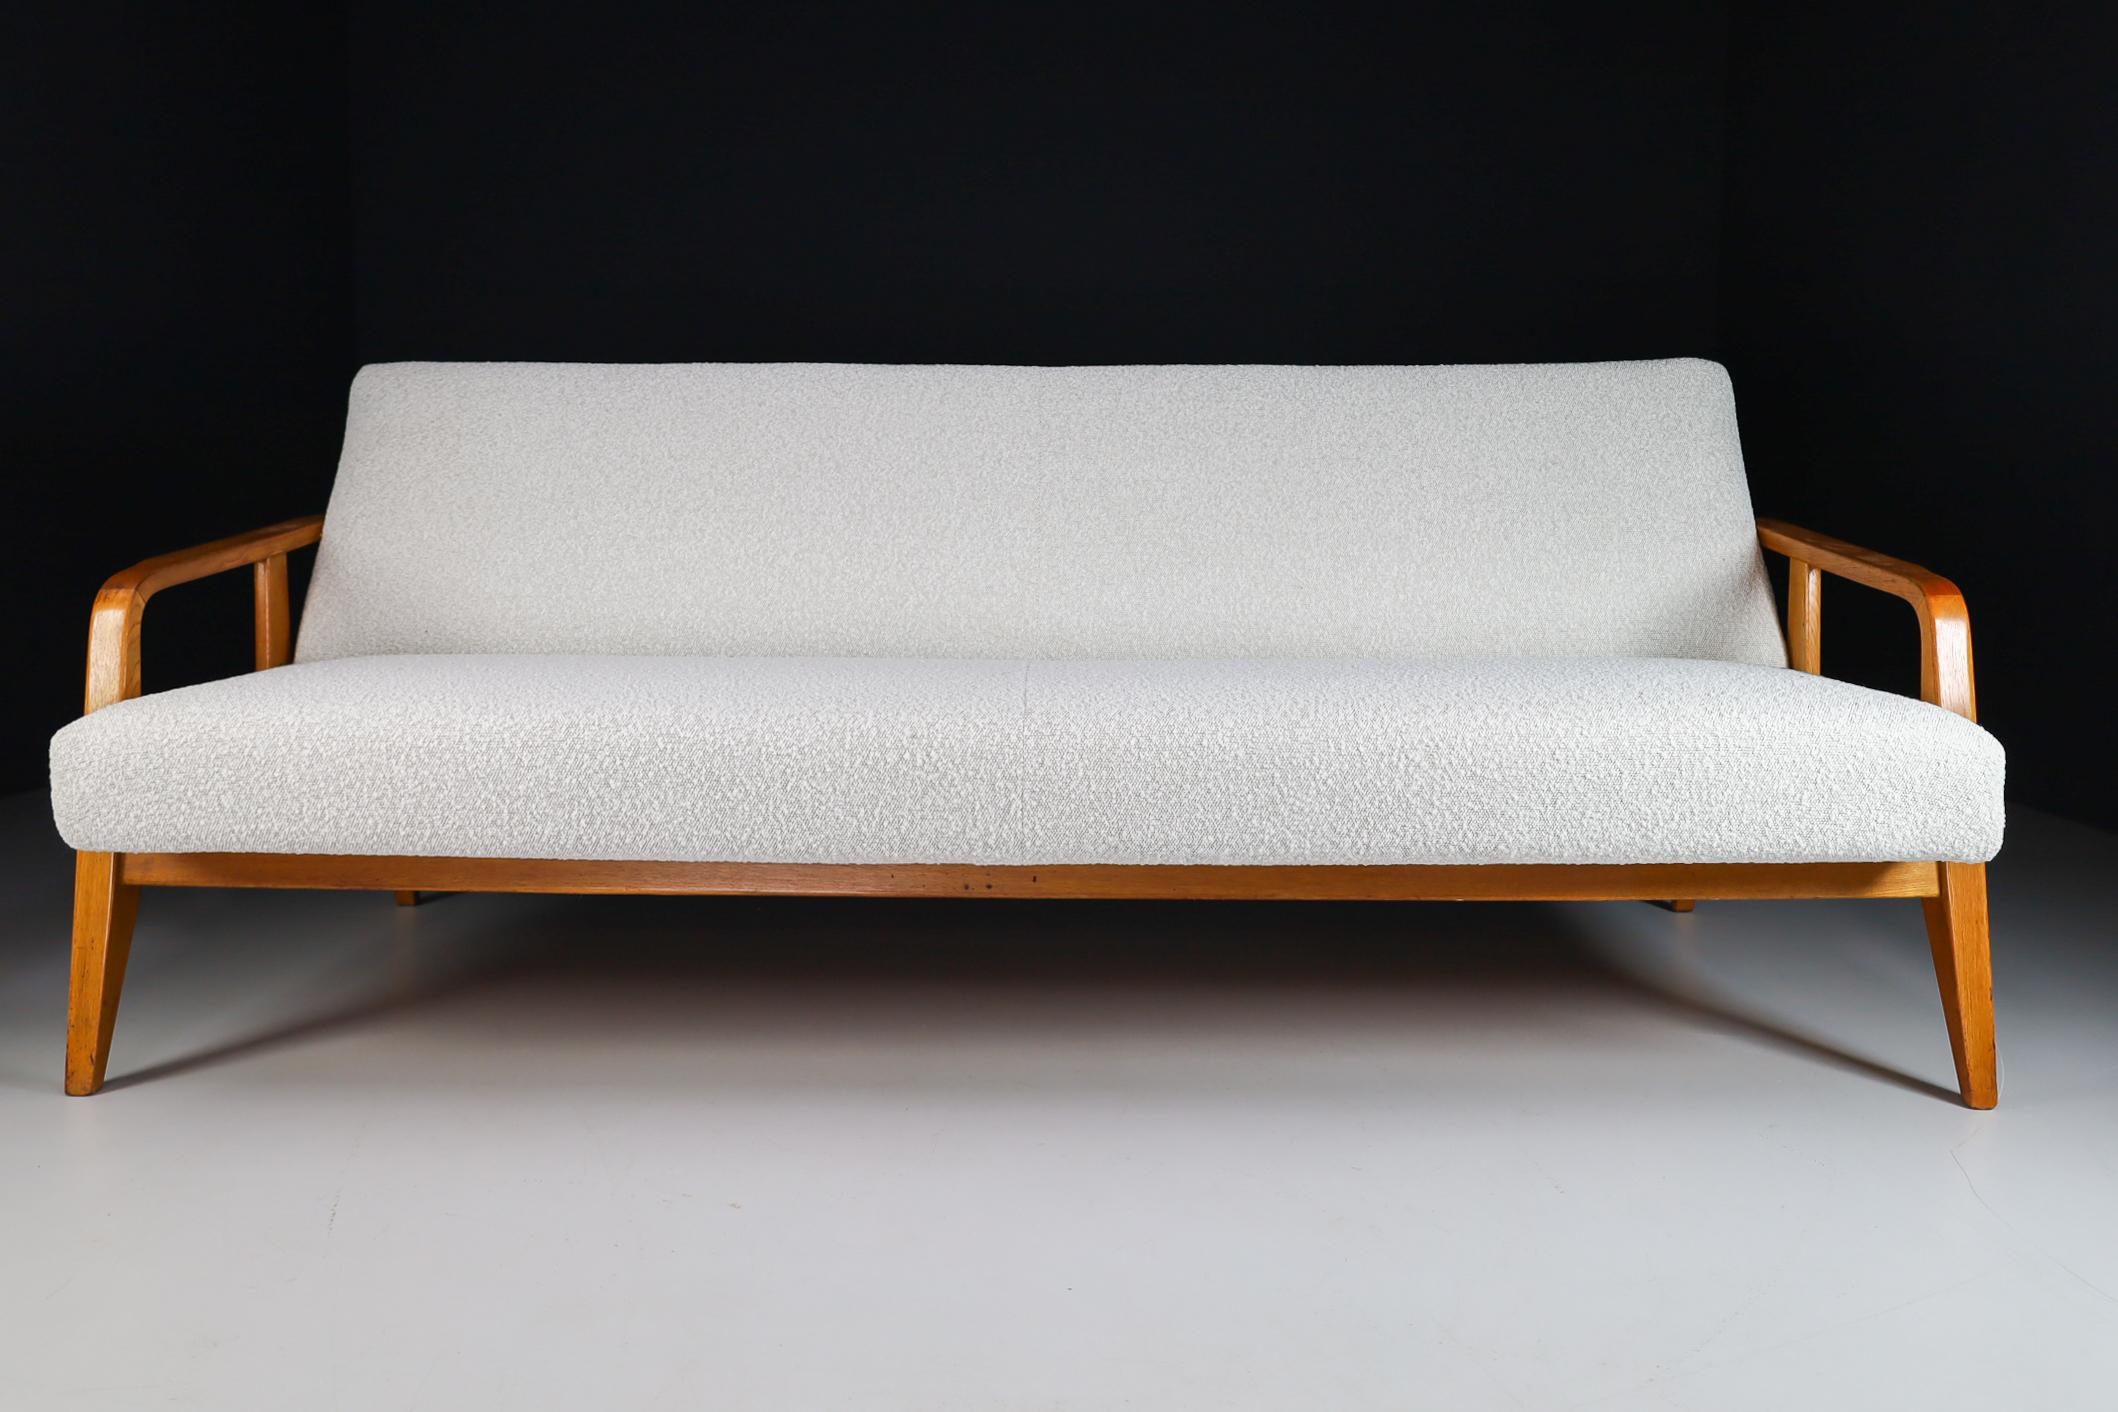 Mid-Century Modern oak sofa /daybed In new boucle upholstery wool , France 1950s. The grain of the wood is nicely visible, especially on the elegant armrests. This sofa /daybed would make an eye-catching addition to any interior such as living room,